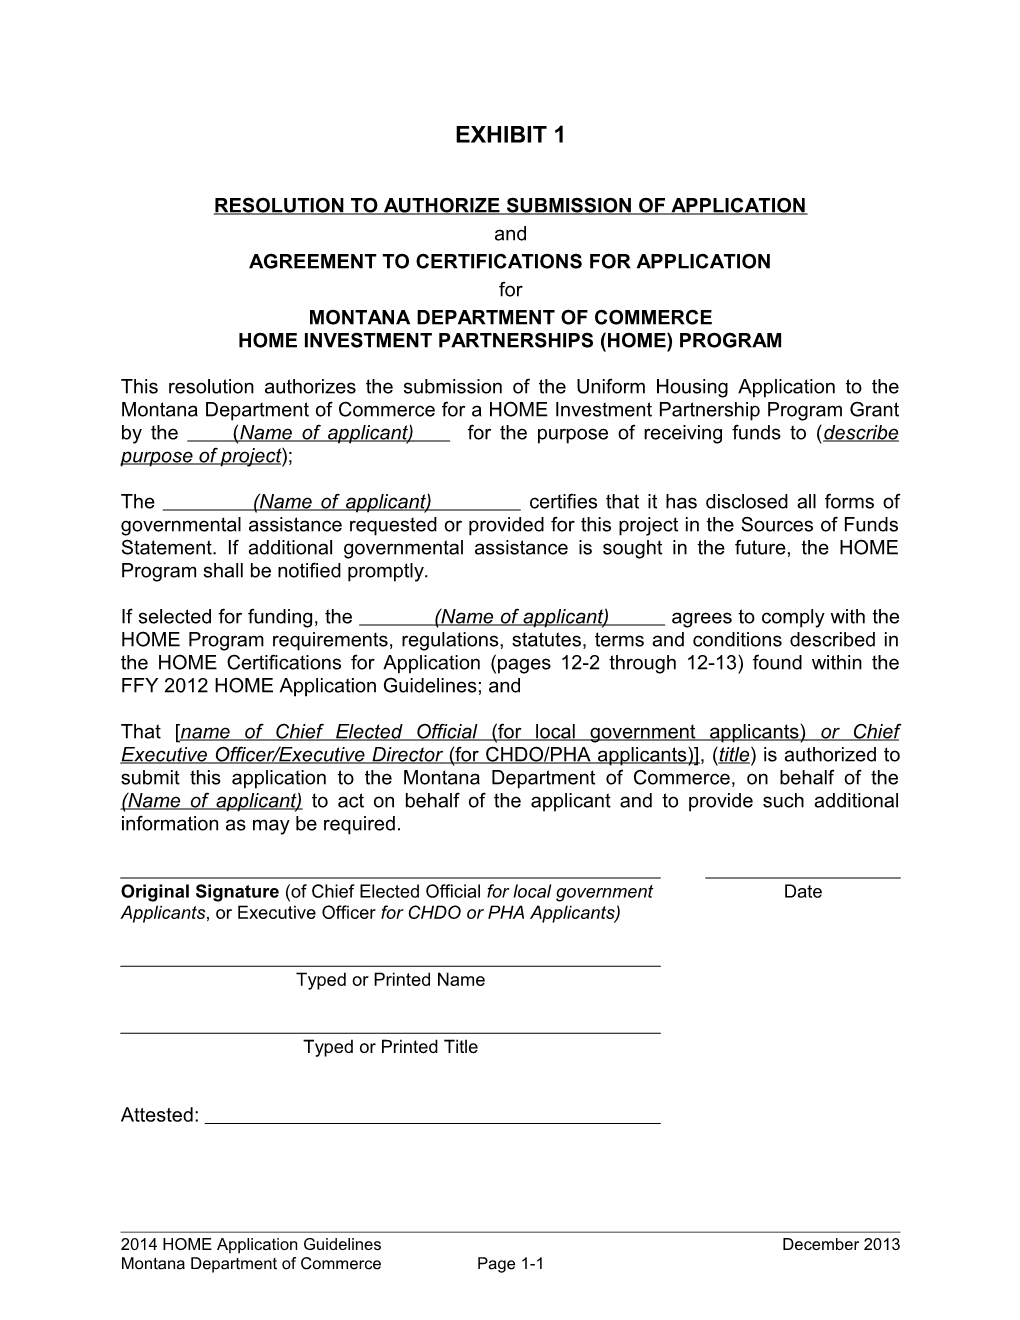 Resolution to Authorize Submission of Application